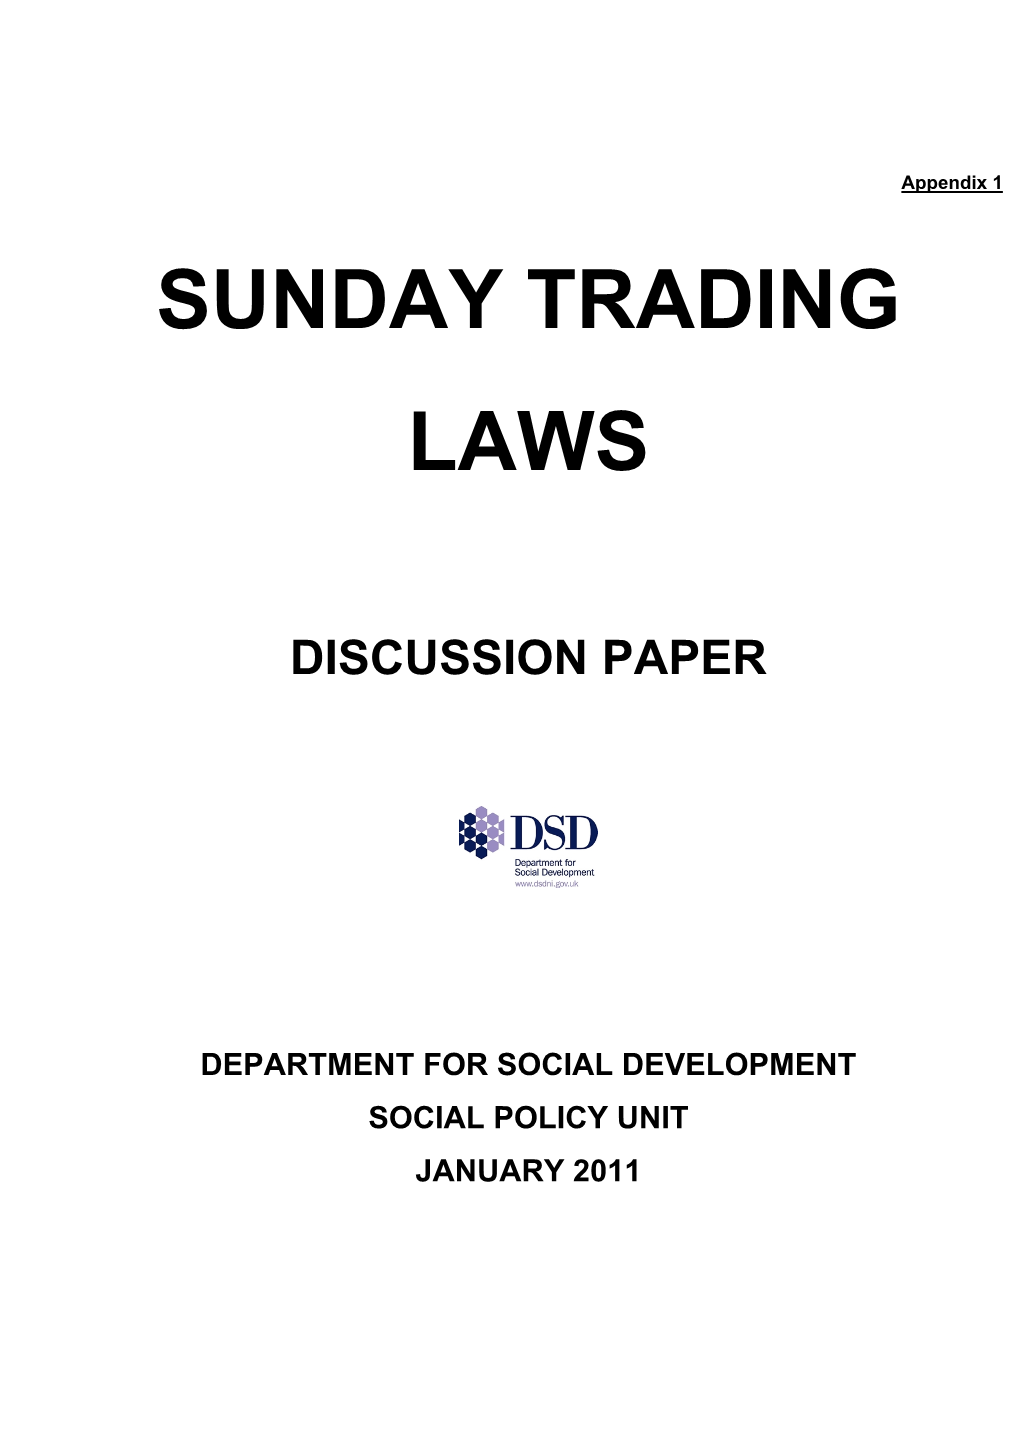 DSD Consultation Paper Re Sunday Trading Laws